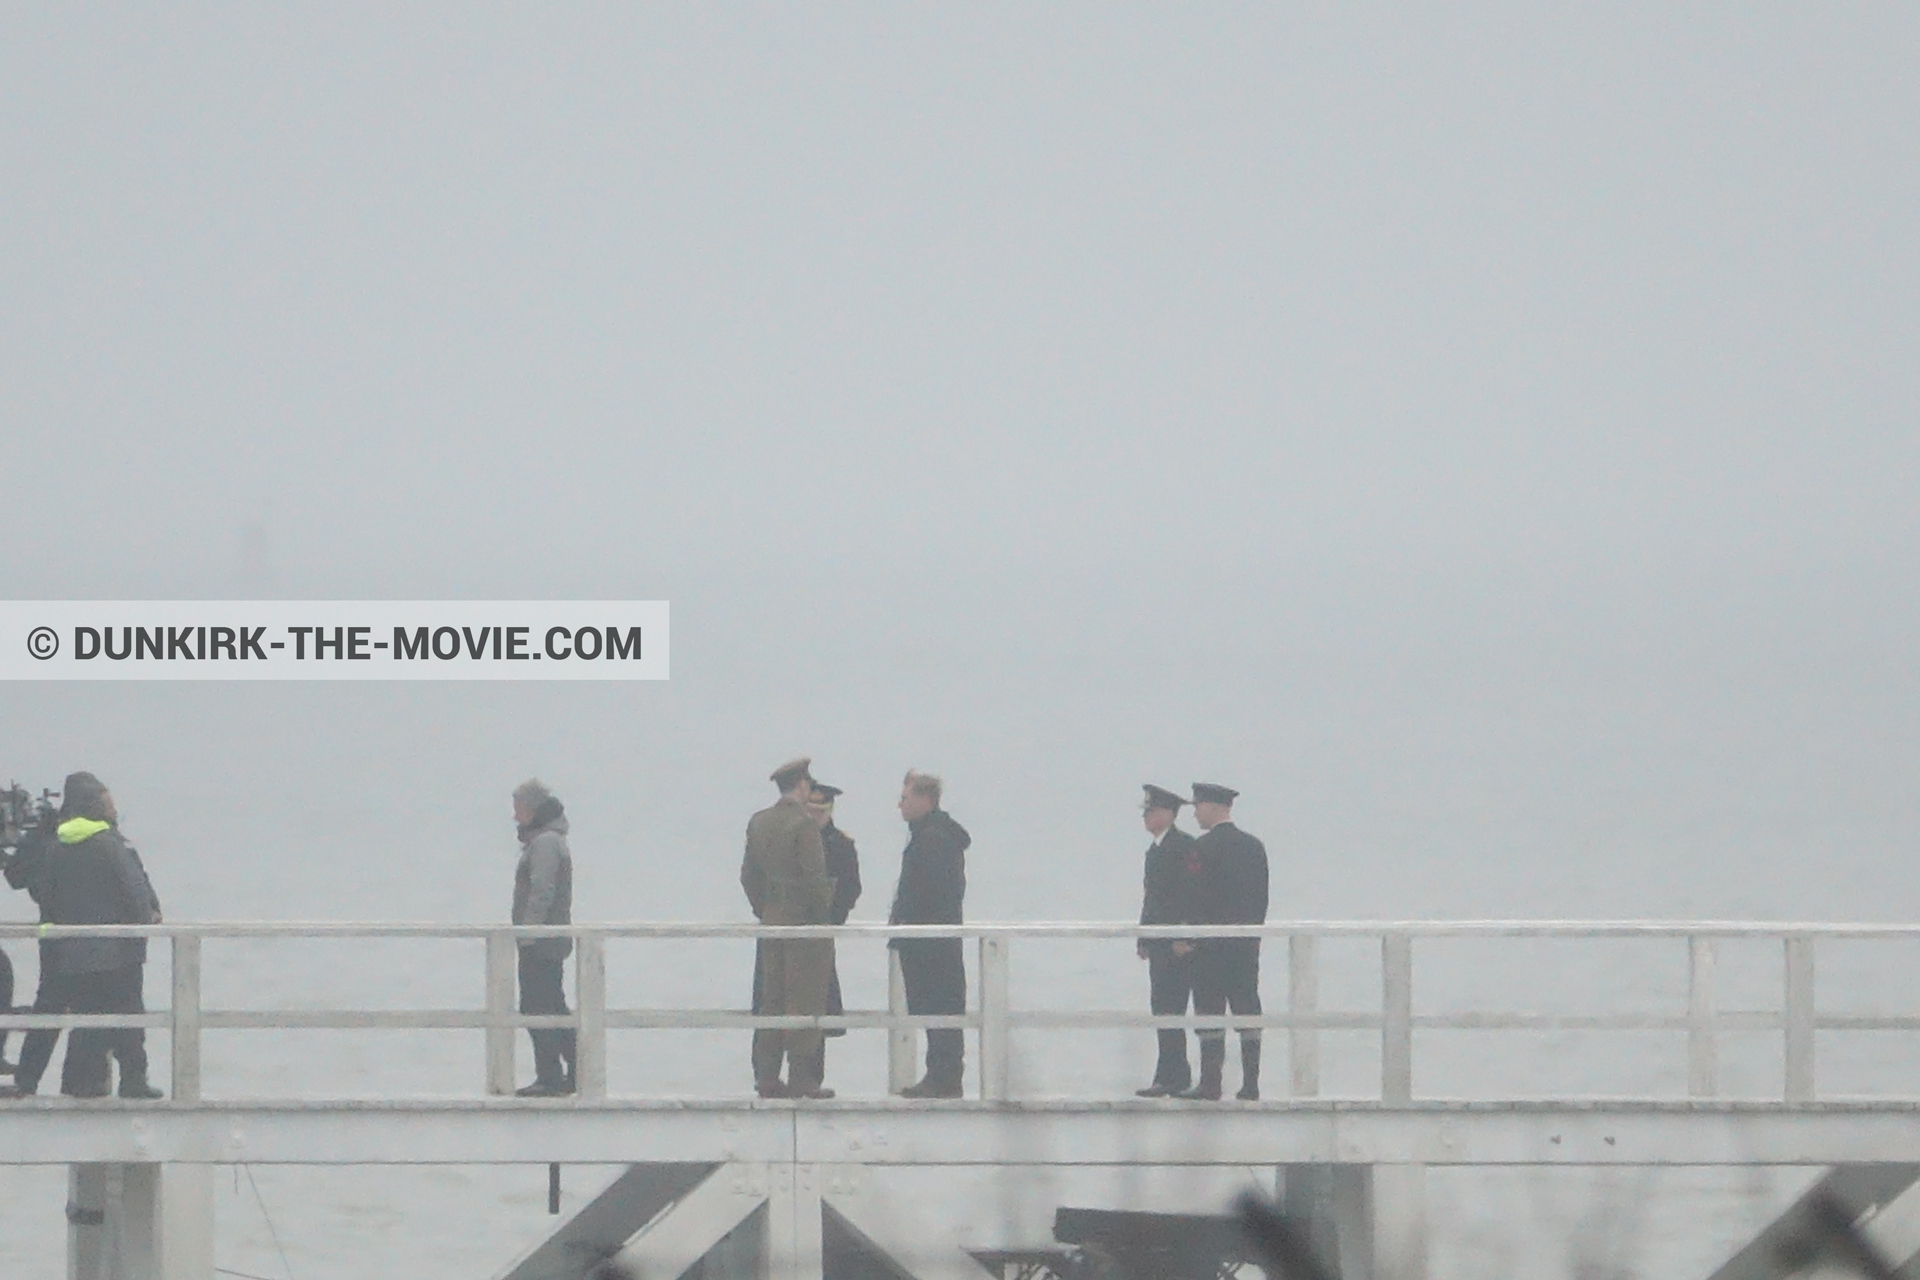 Picture with actor, grey sky, Hoyte van Hoytema, EST pier, Christopher Nolan,  from behind the scene of the Dunkirk movie by Nolan